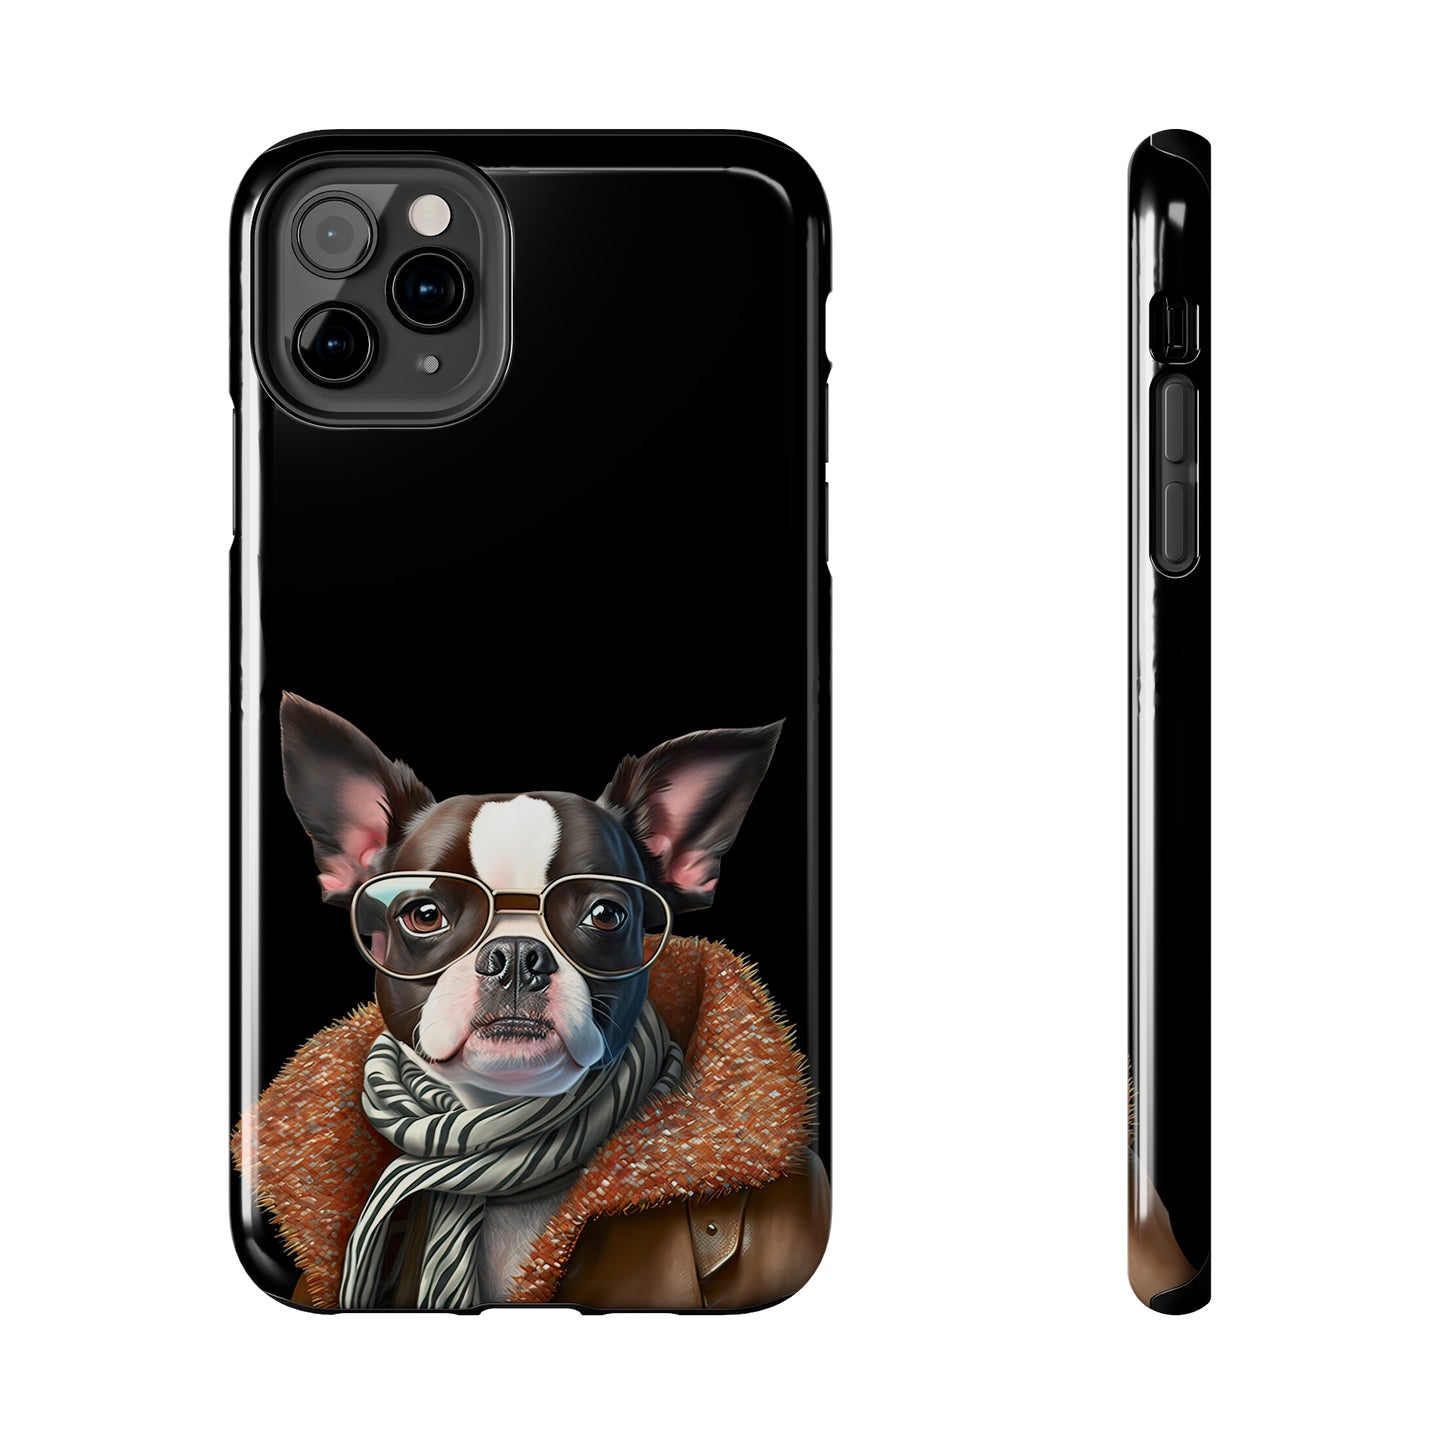  Benny Tough Phone Cases in USA - Shaggy Chic